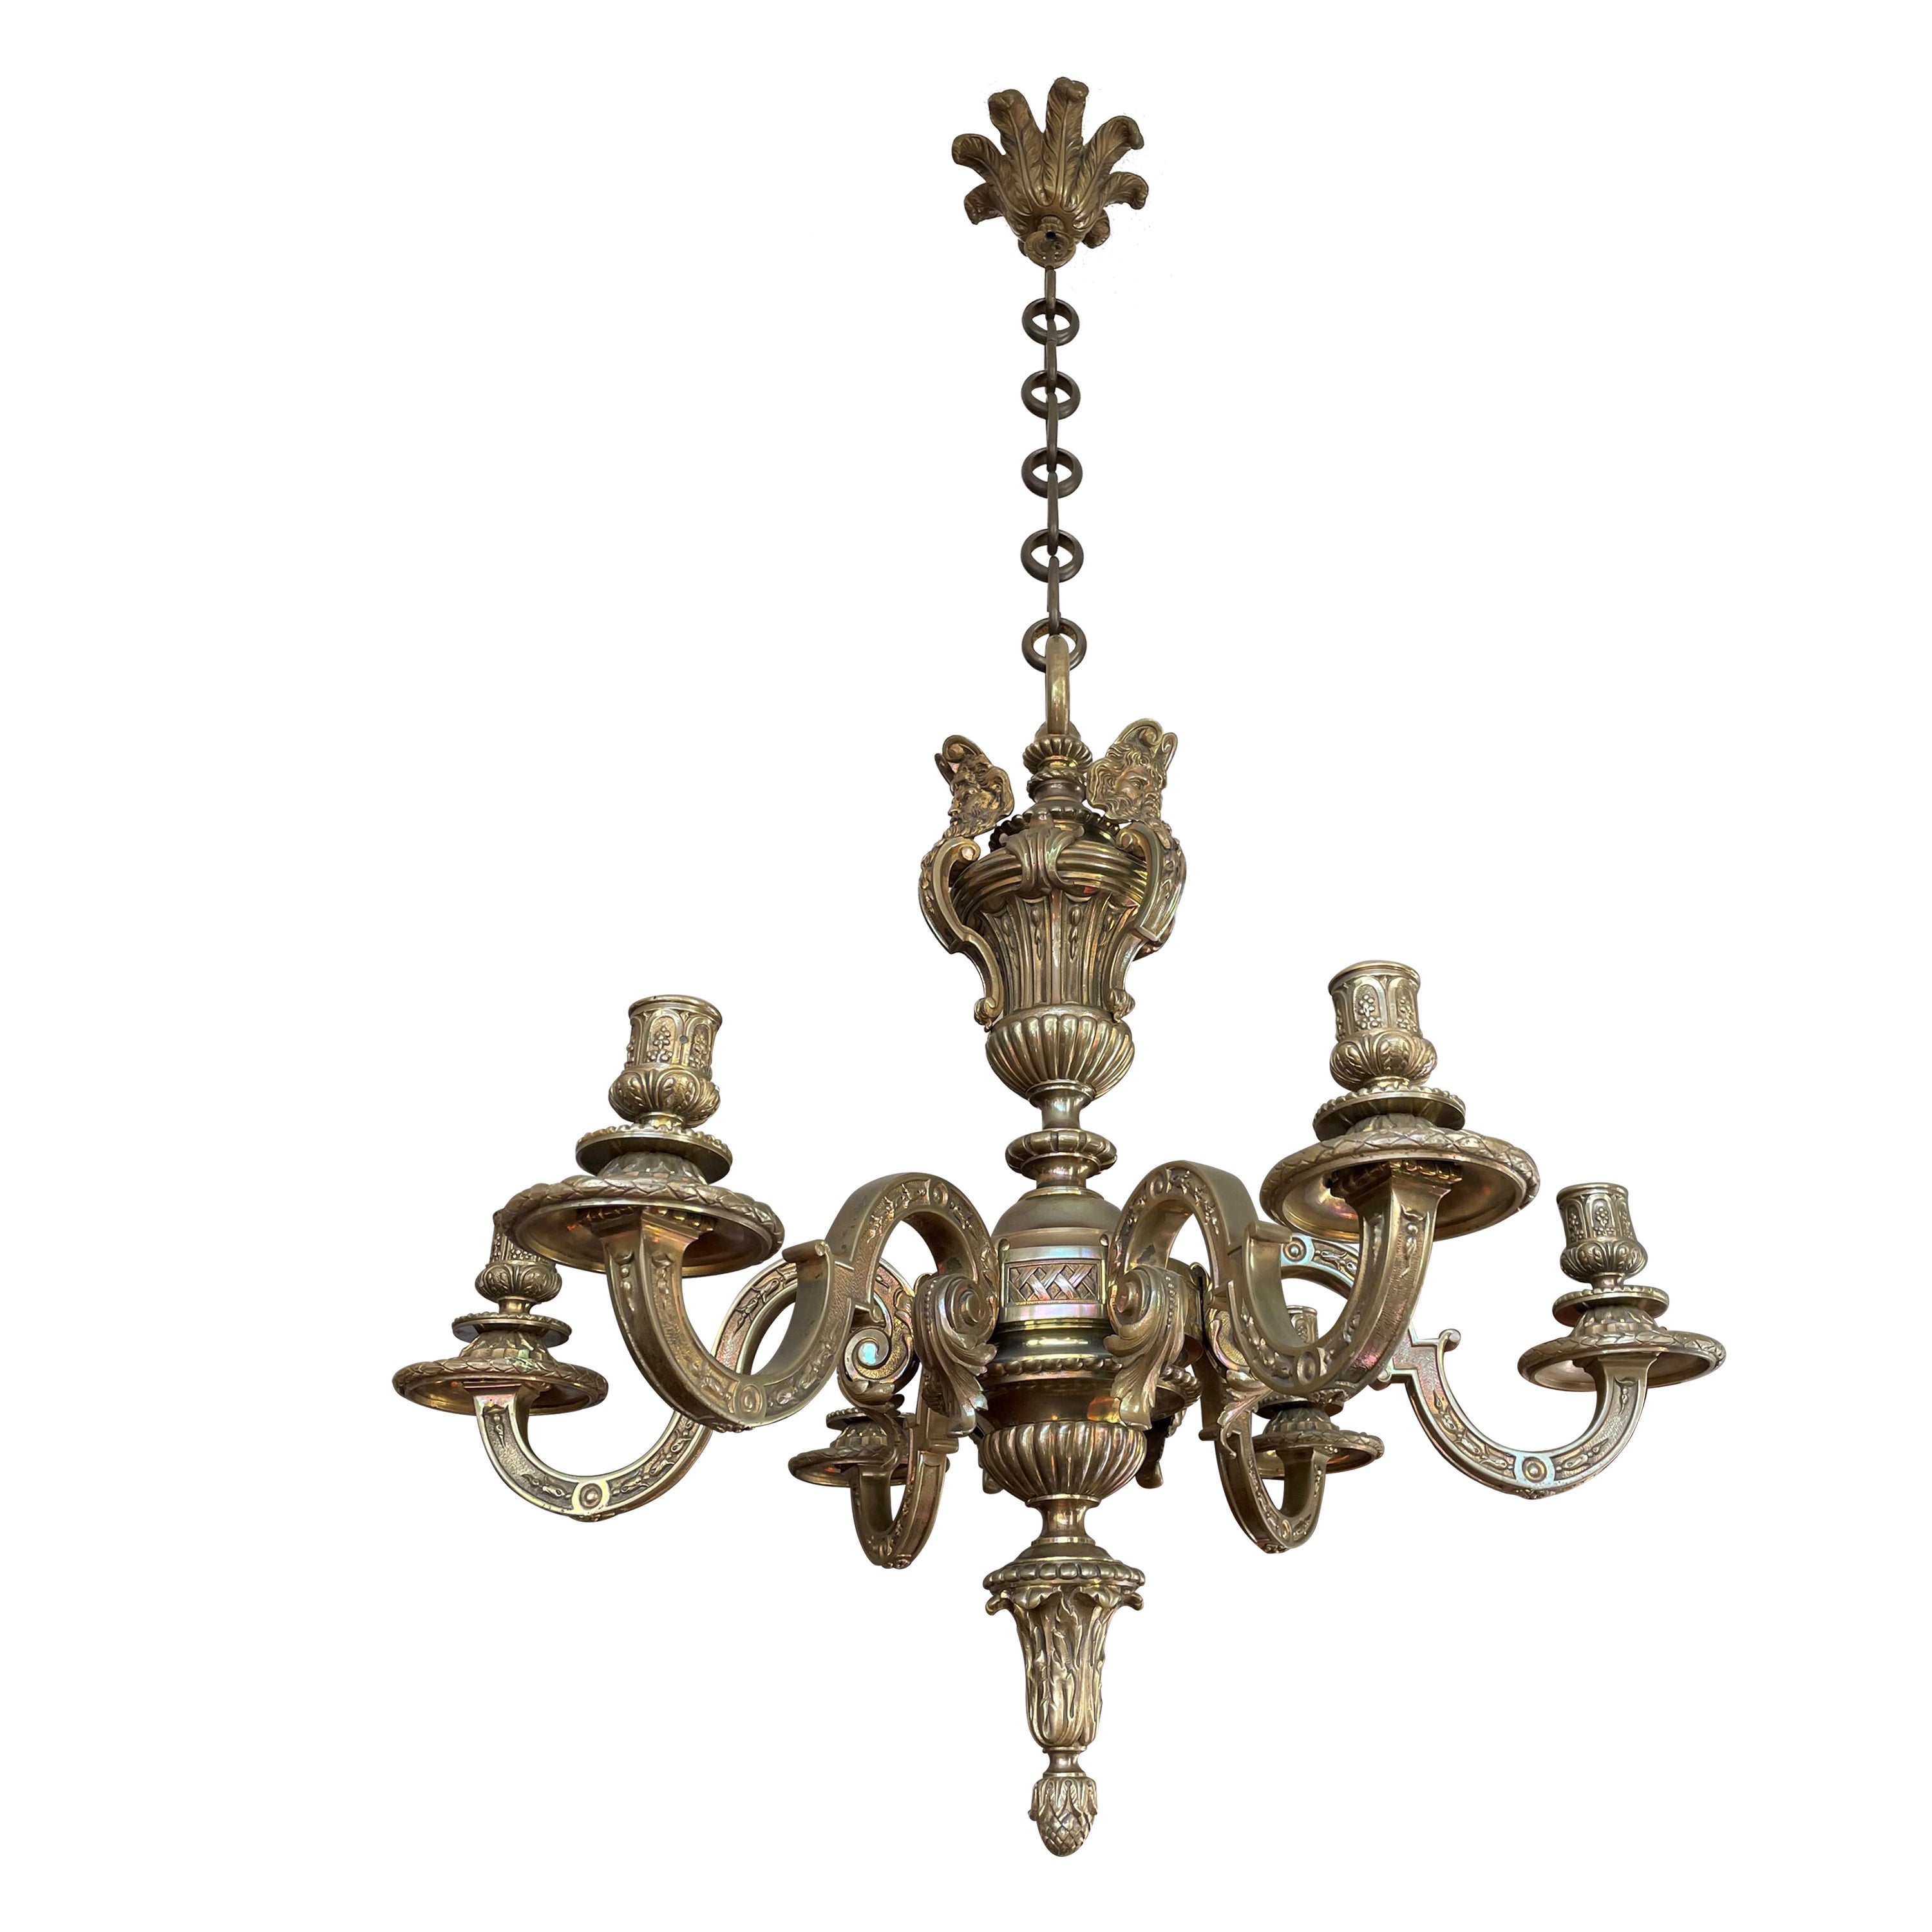 Stunning Antique French and Finest Bronze Sculptural Candle Chandelier / Pendant For Sale